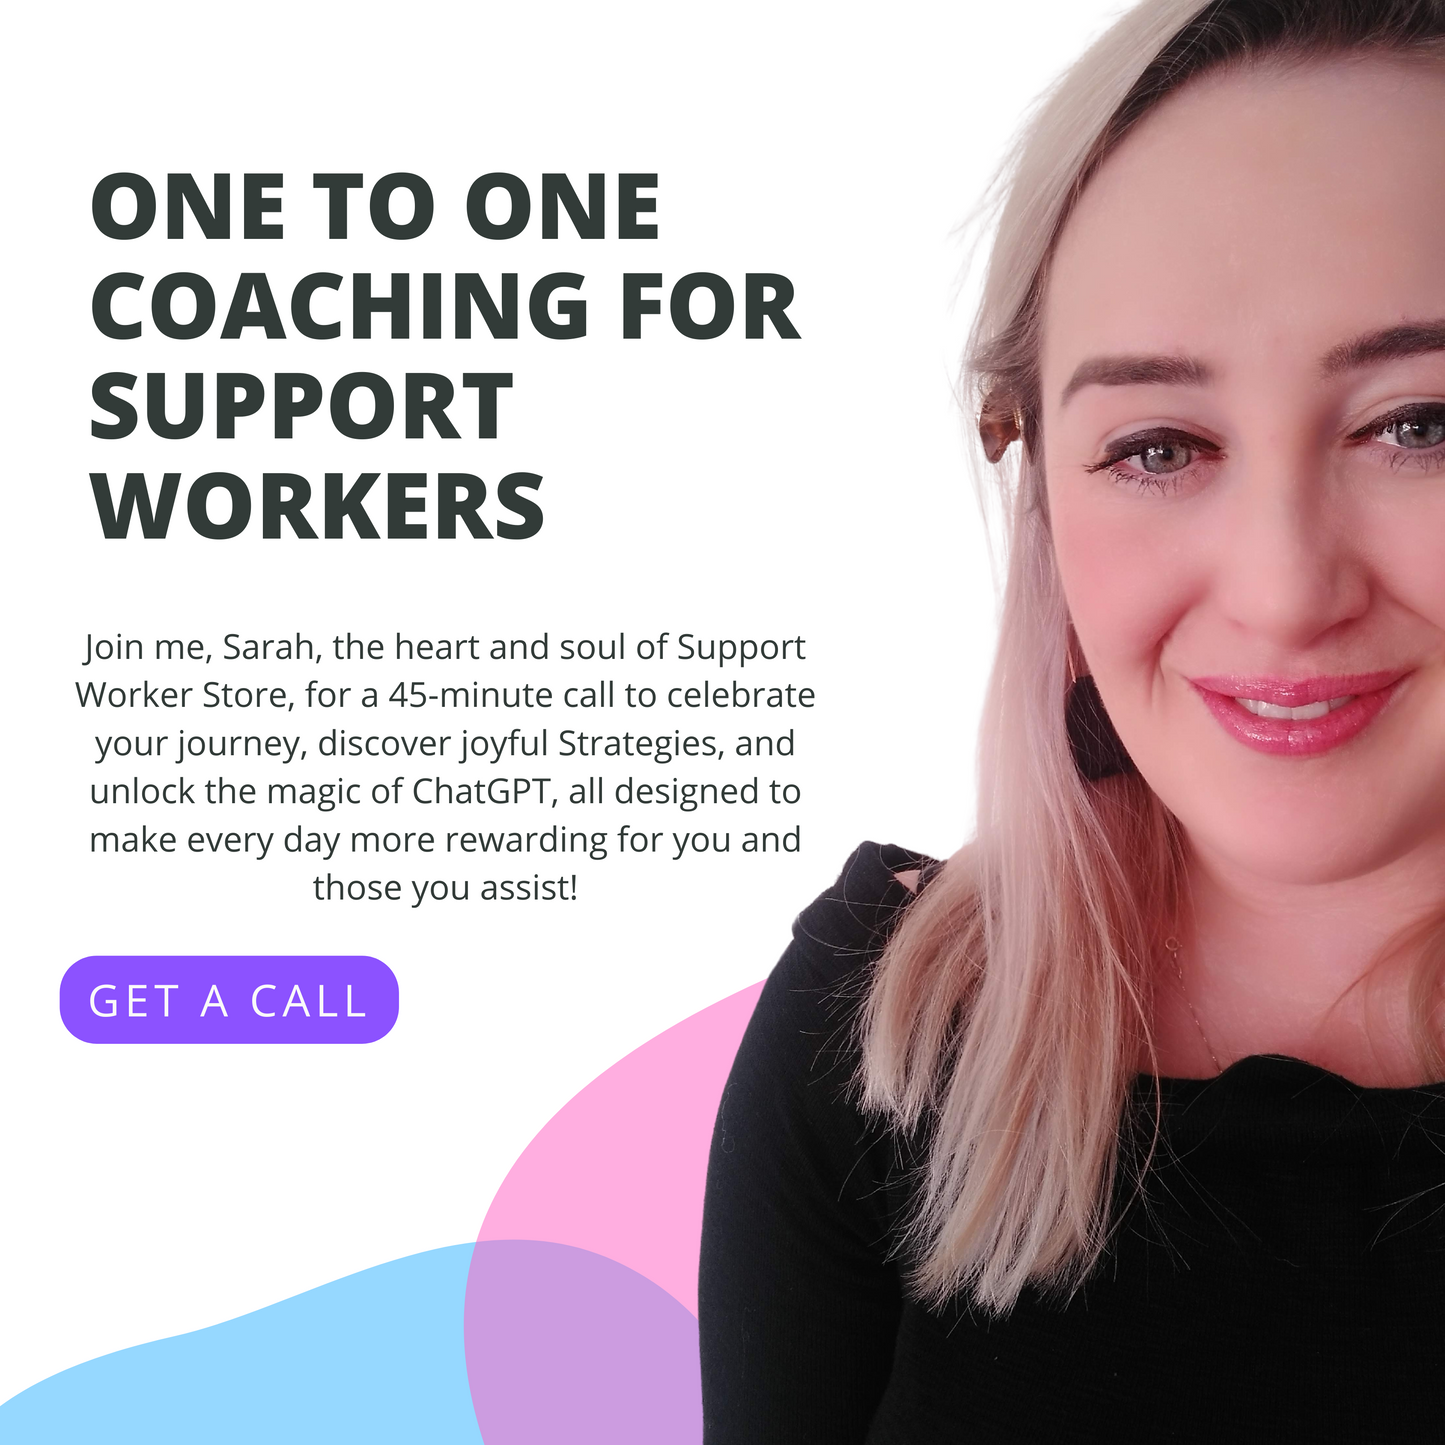 One to One Coaching for Support Workers